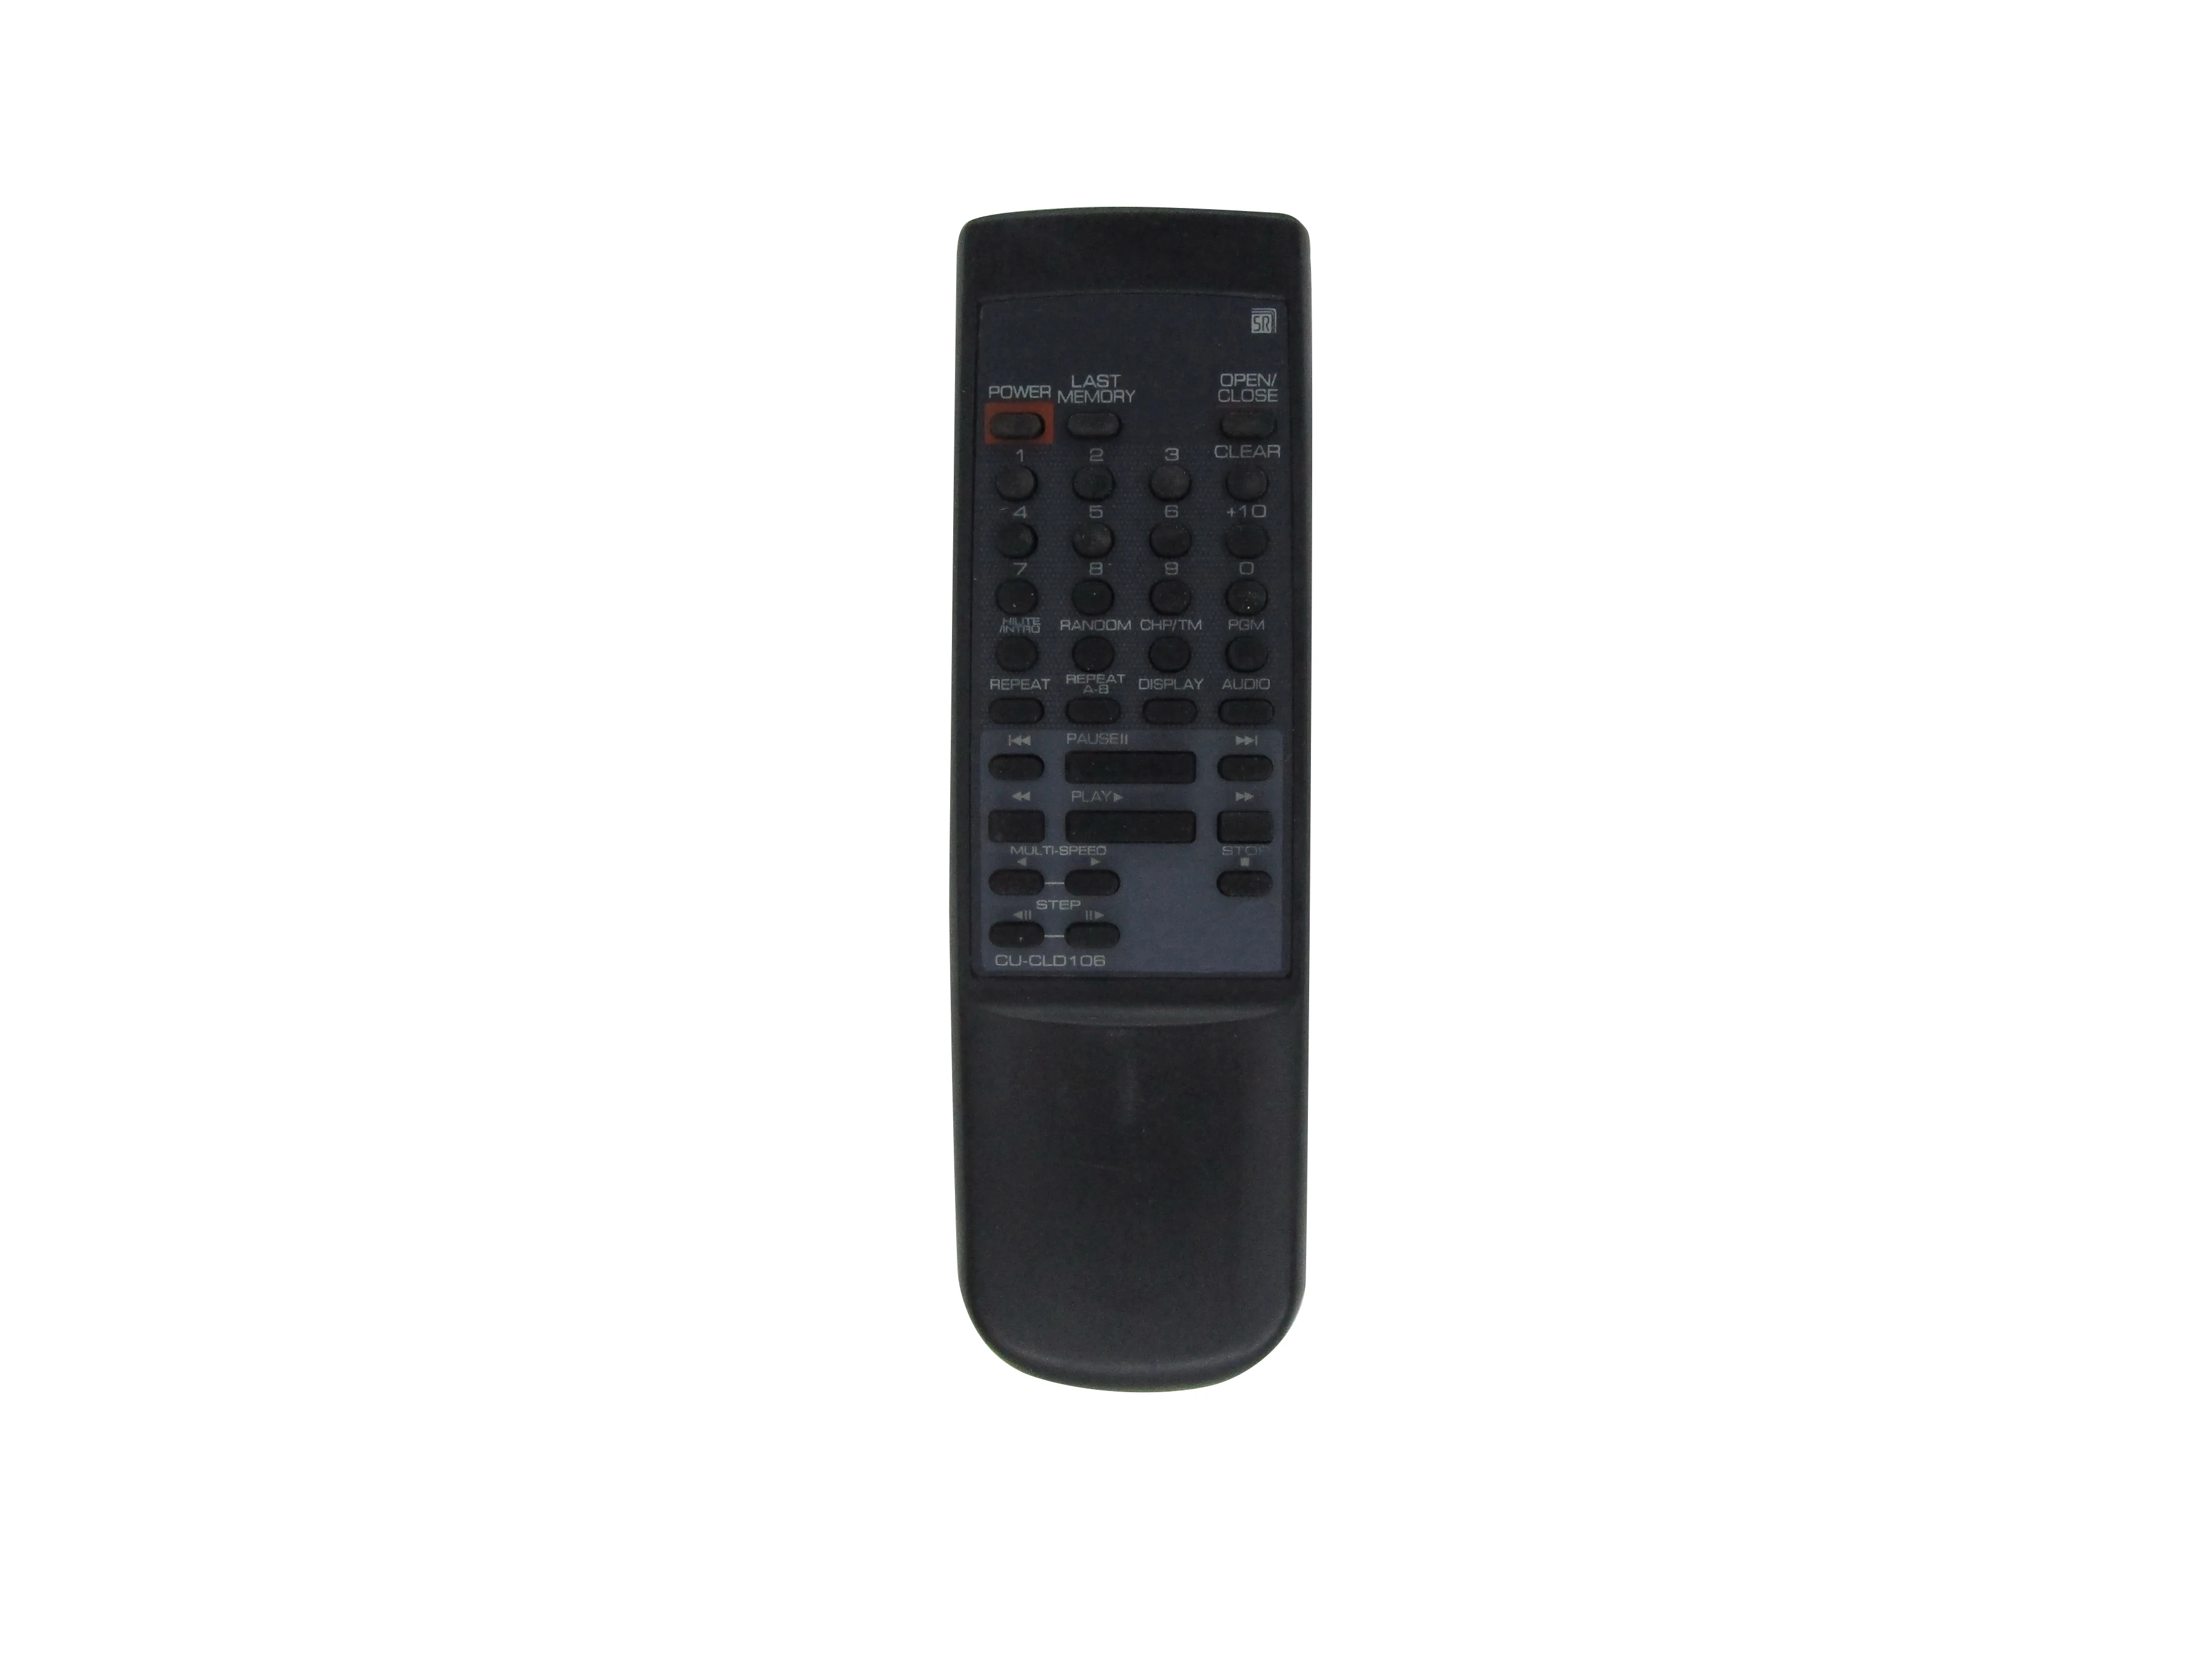 

Remote Control For Pioneer CU-CLD106 CLD-S370 CLD-S304 CLD-S270 CLD-S104 CLD-S105 CLD-S180 CLD-S280 CU-CLD155 CU-XR036 CDV PLaye